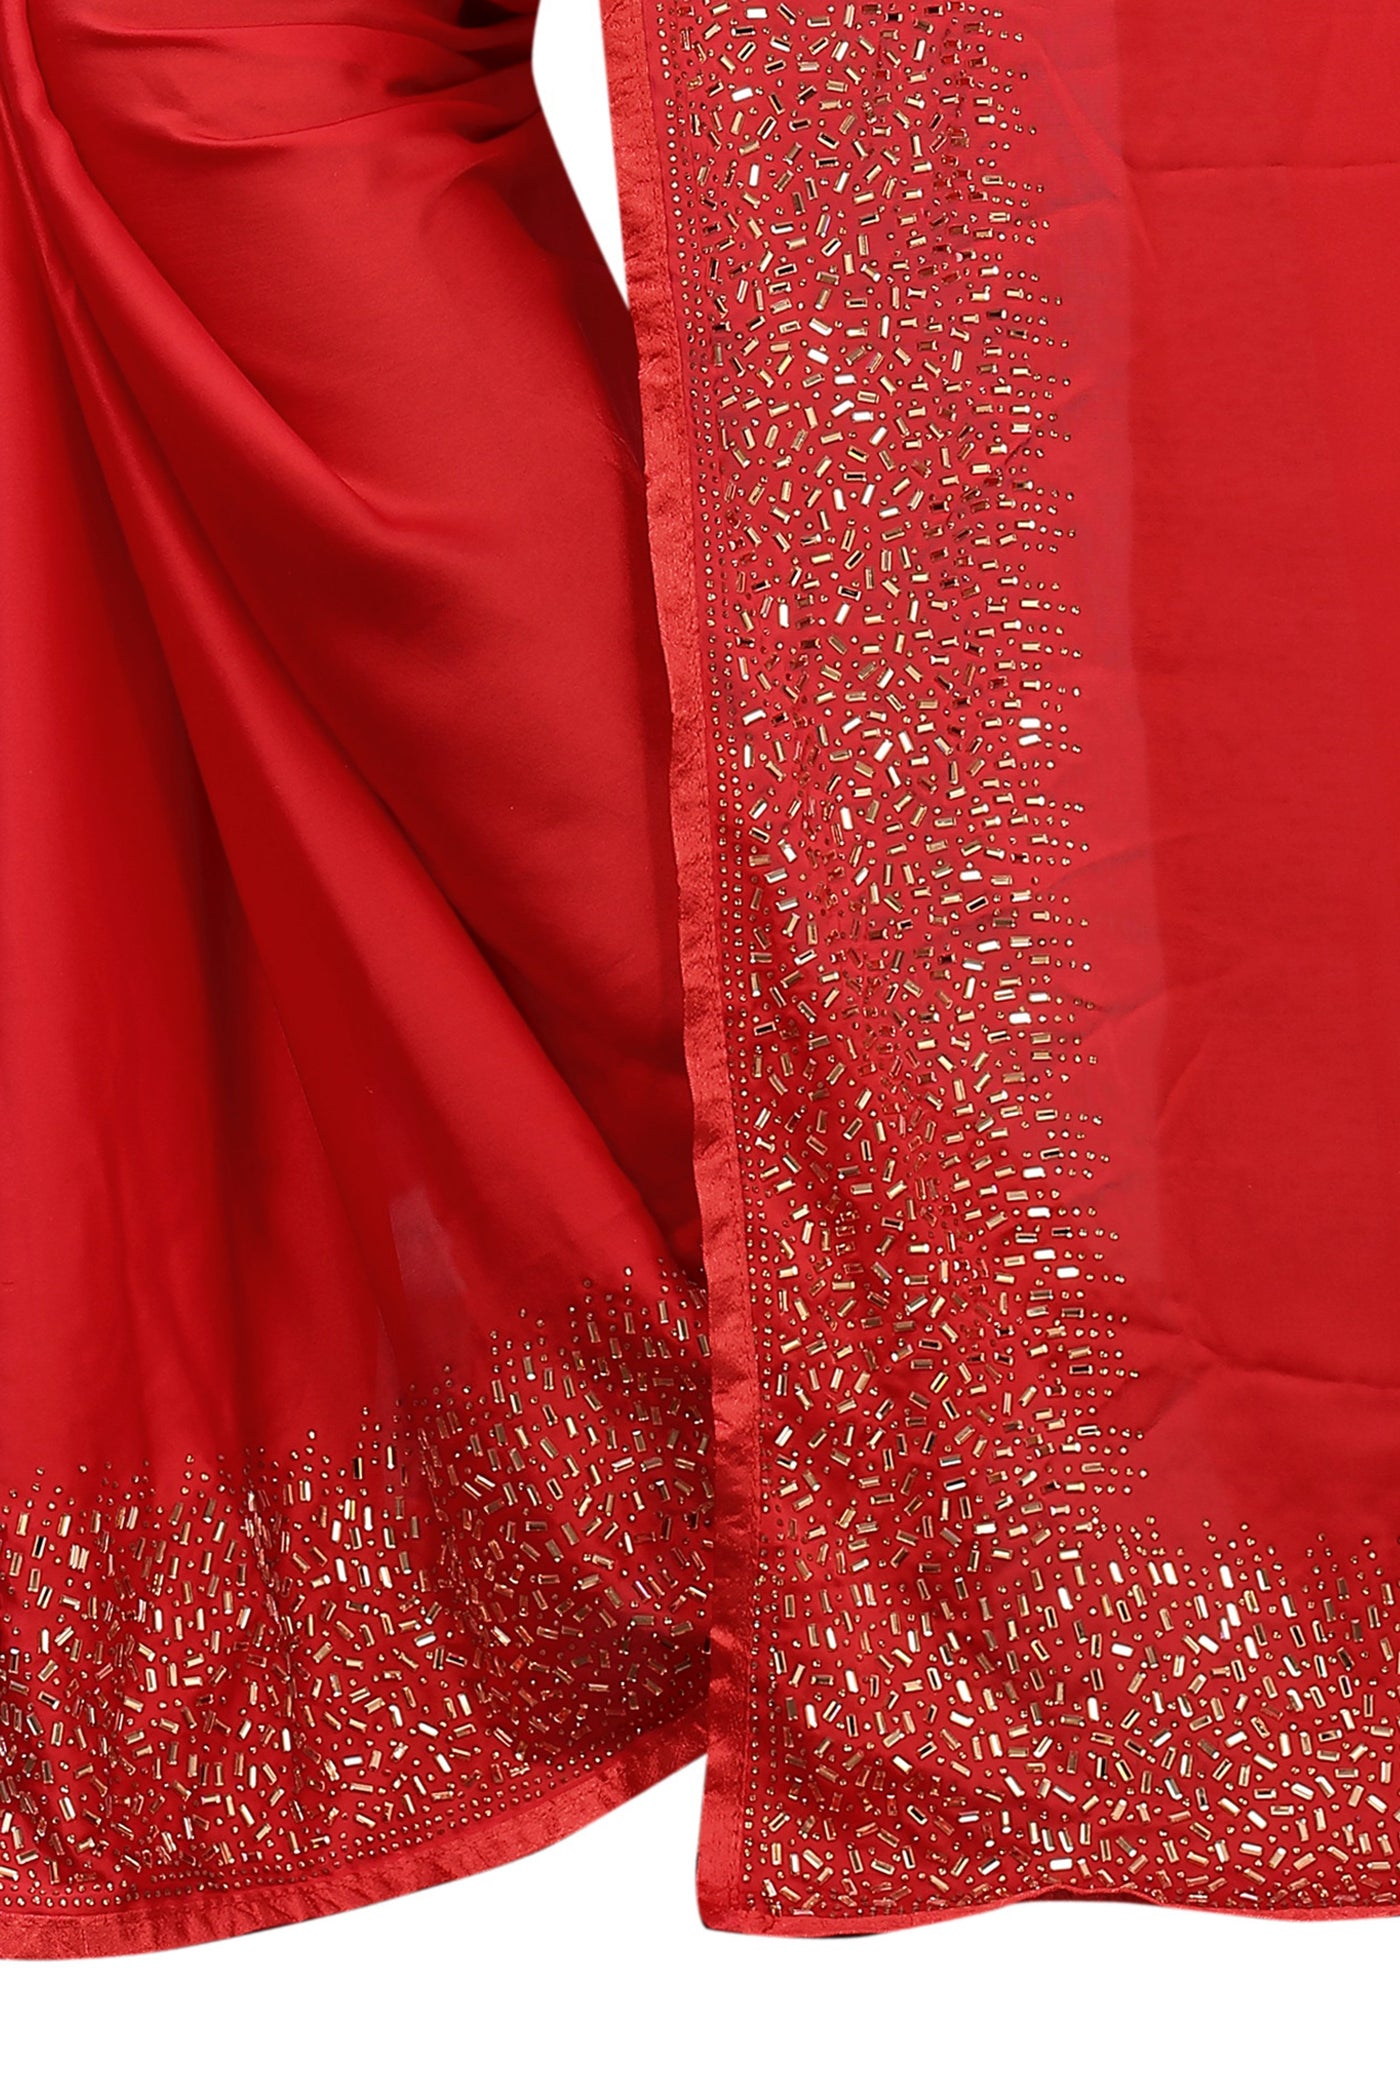 Pure Satin Red Saree With Blouse